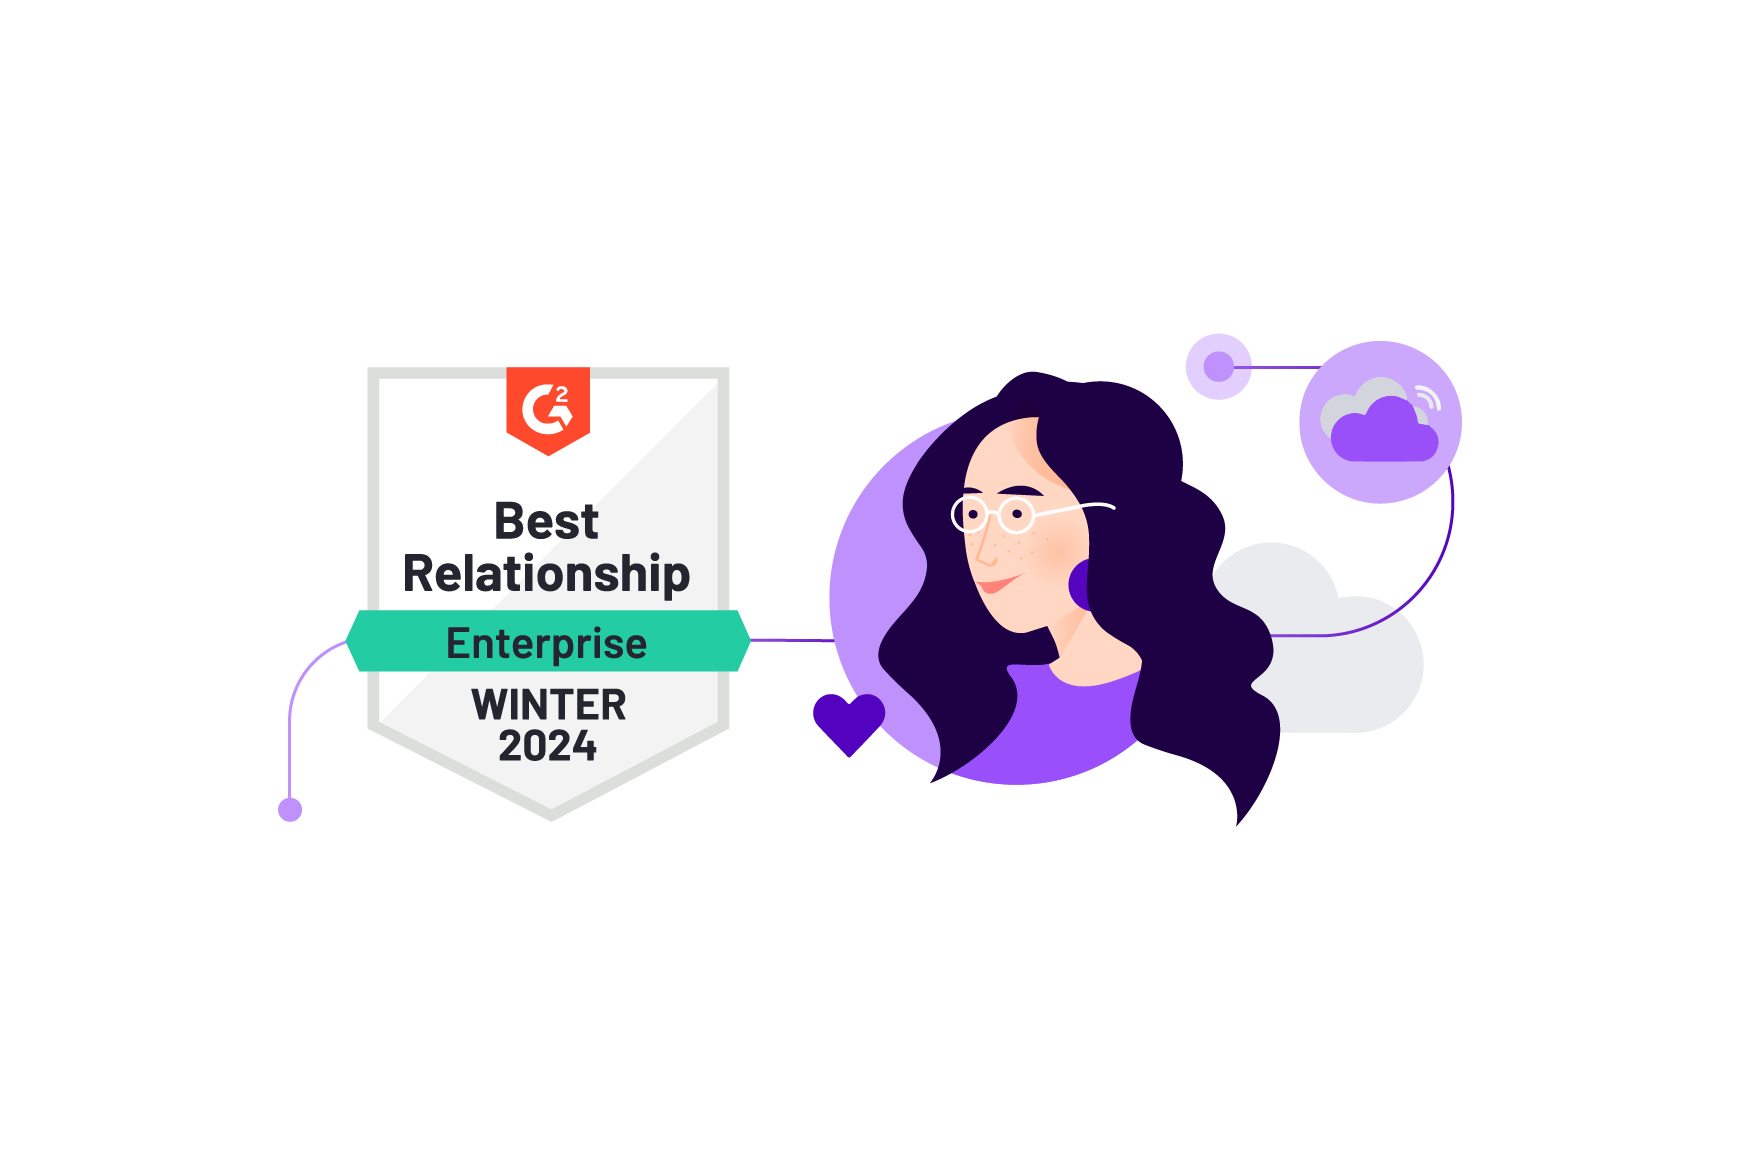 Talkdesk ranks as the leader in G2’s Winter 2024 Enterprise Relationship Index, providing a better customer experience for all.